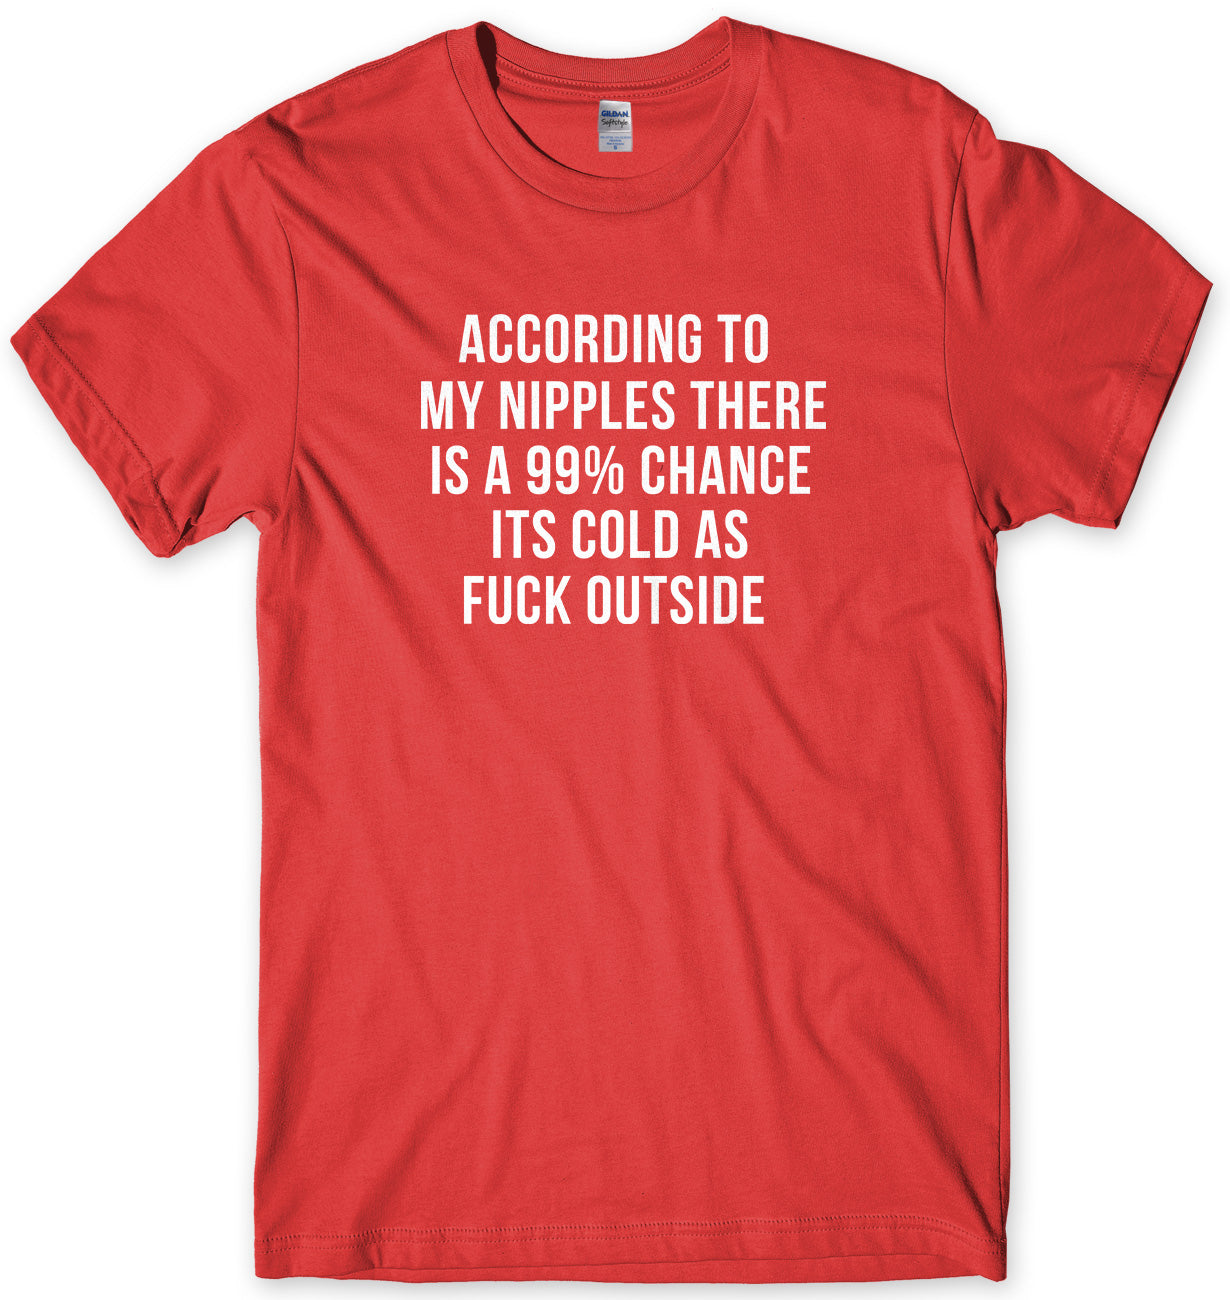 According To My Nipples There Is A 99% Chance It's Cold Outside Mens Unisex T-Shirt